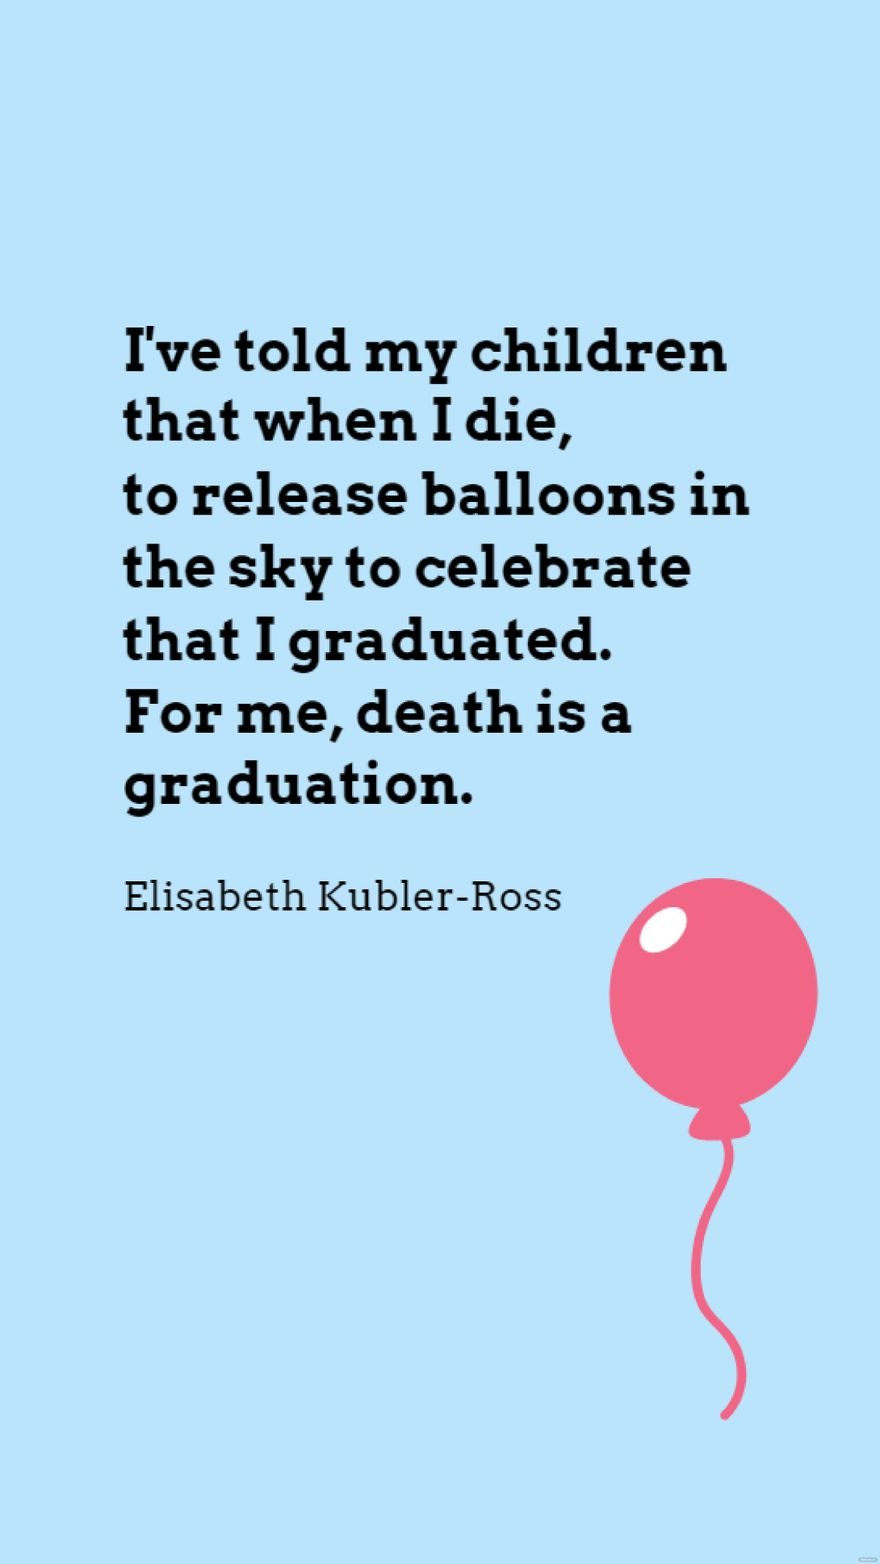 Free Elisabeth Kubler-Ross - I've told my children that when I die, to release balloons in the sky to celebrate that I graduated. For me, death is a graduation.